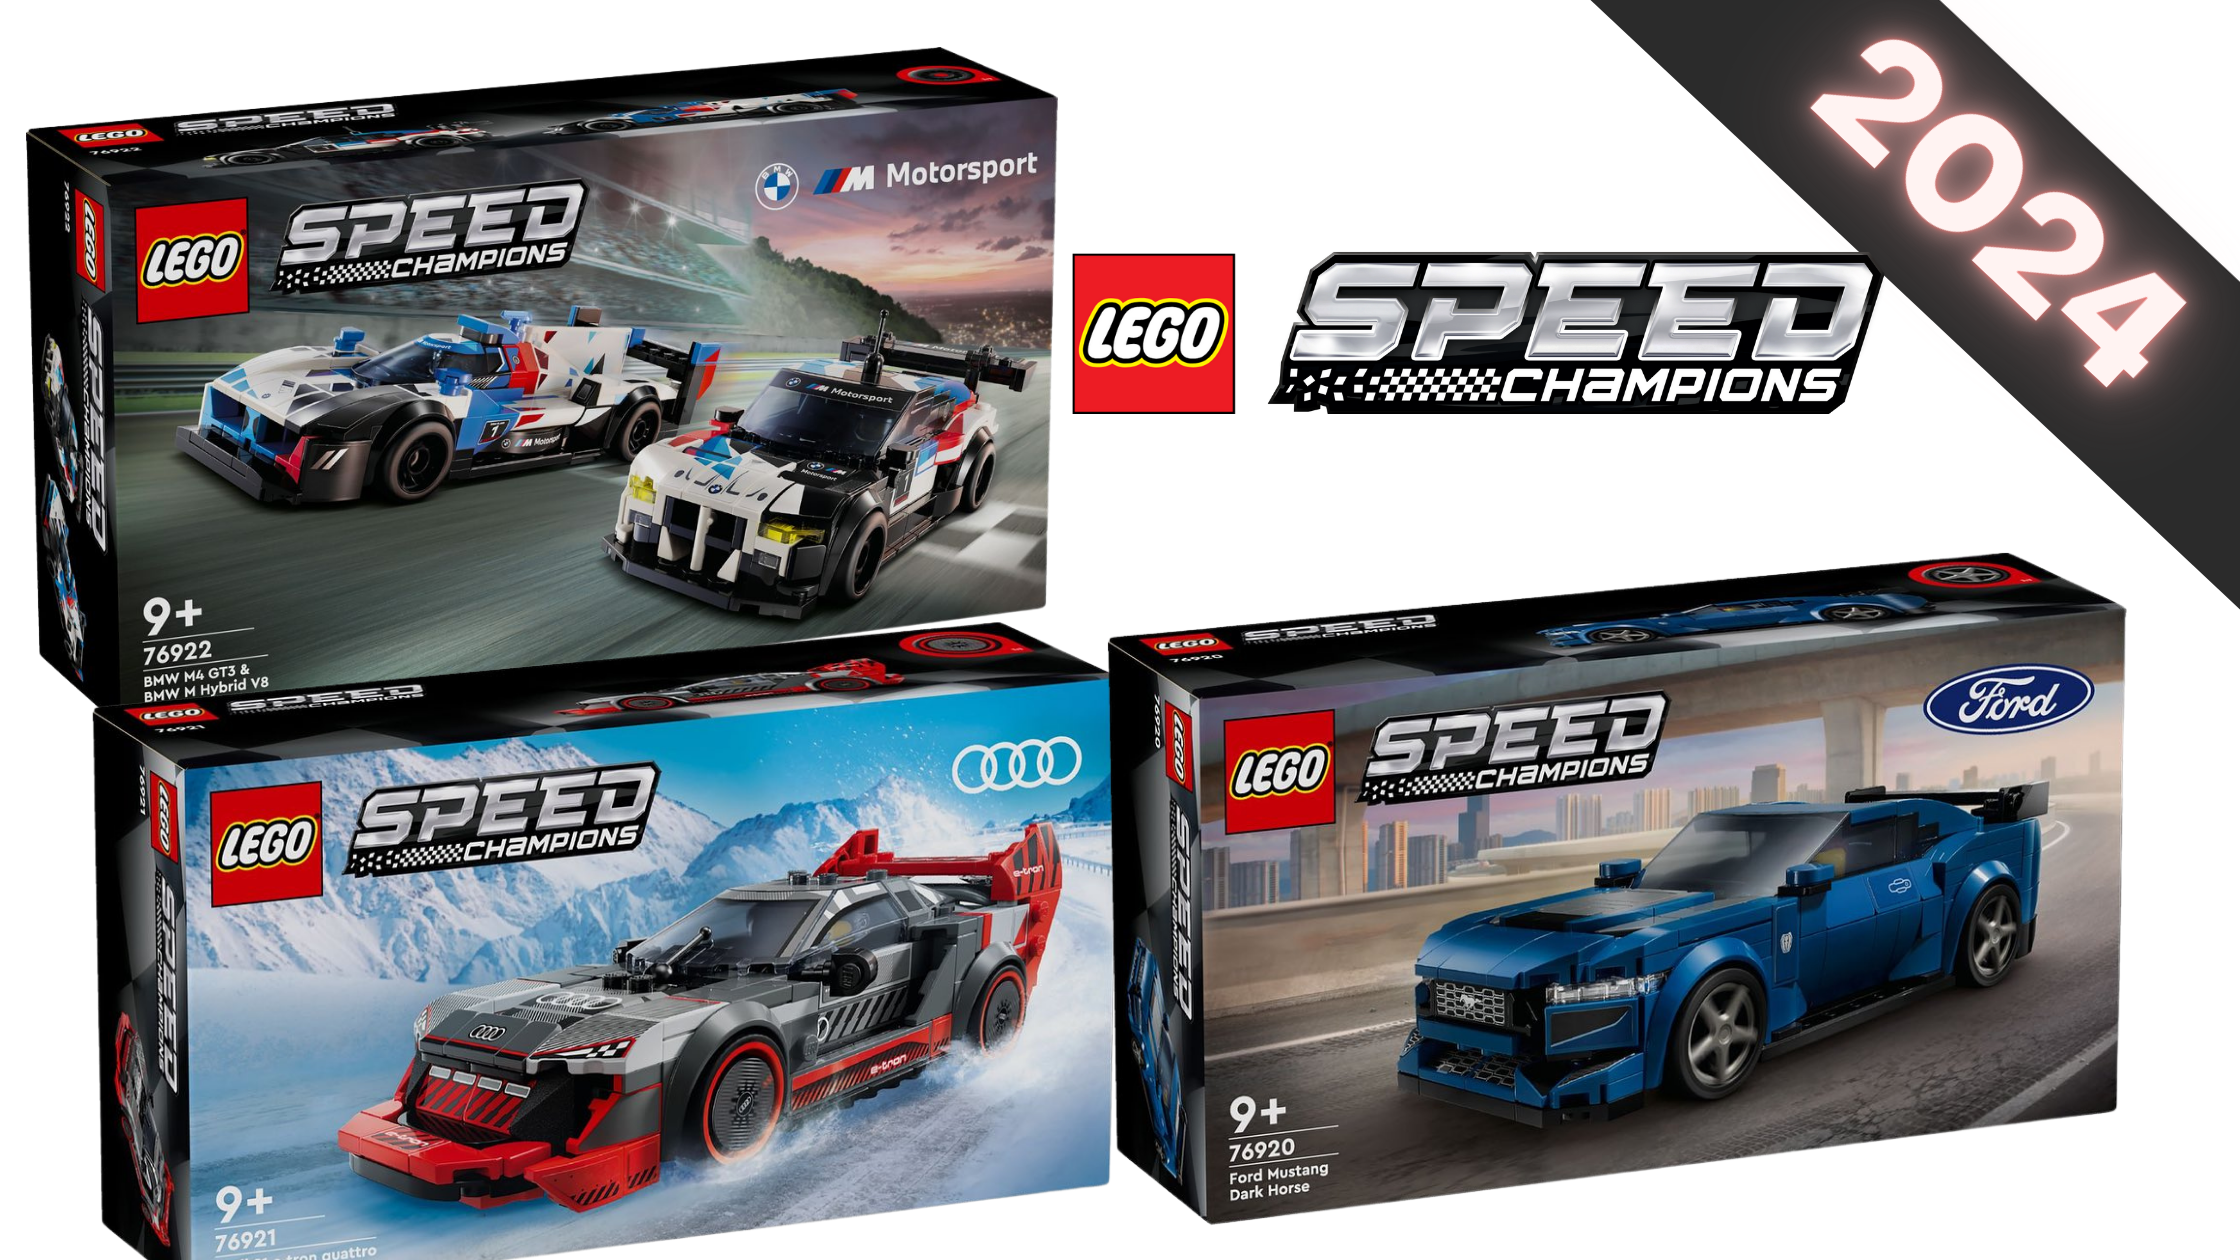 First impressions of the LEGO Speed Champions Nissan Skyline GT-R (R34) and  Brian O'Conner minifigure - Jay's Brick Blog